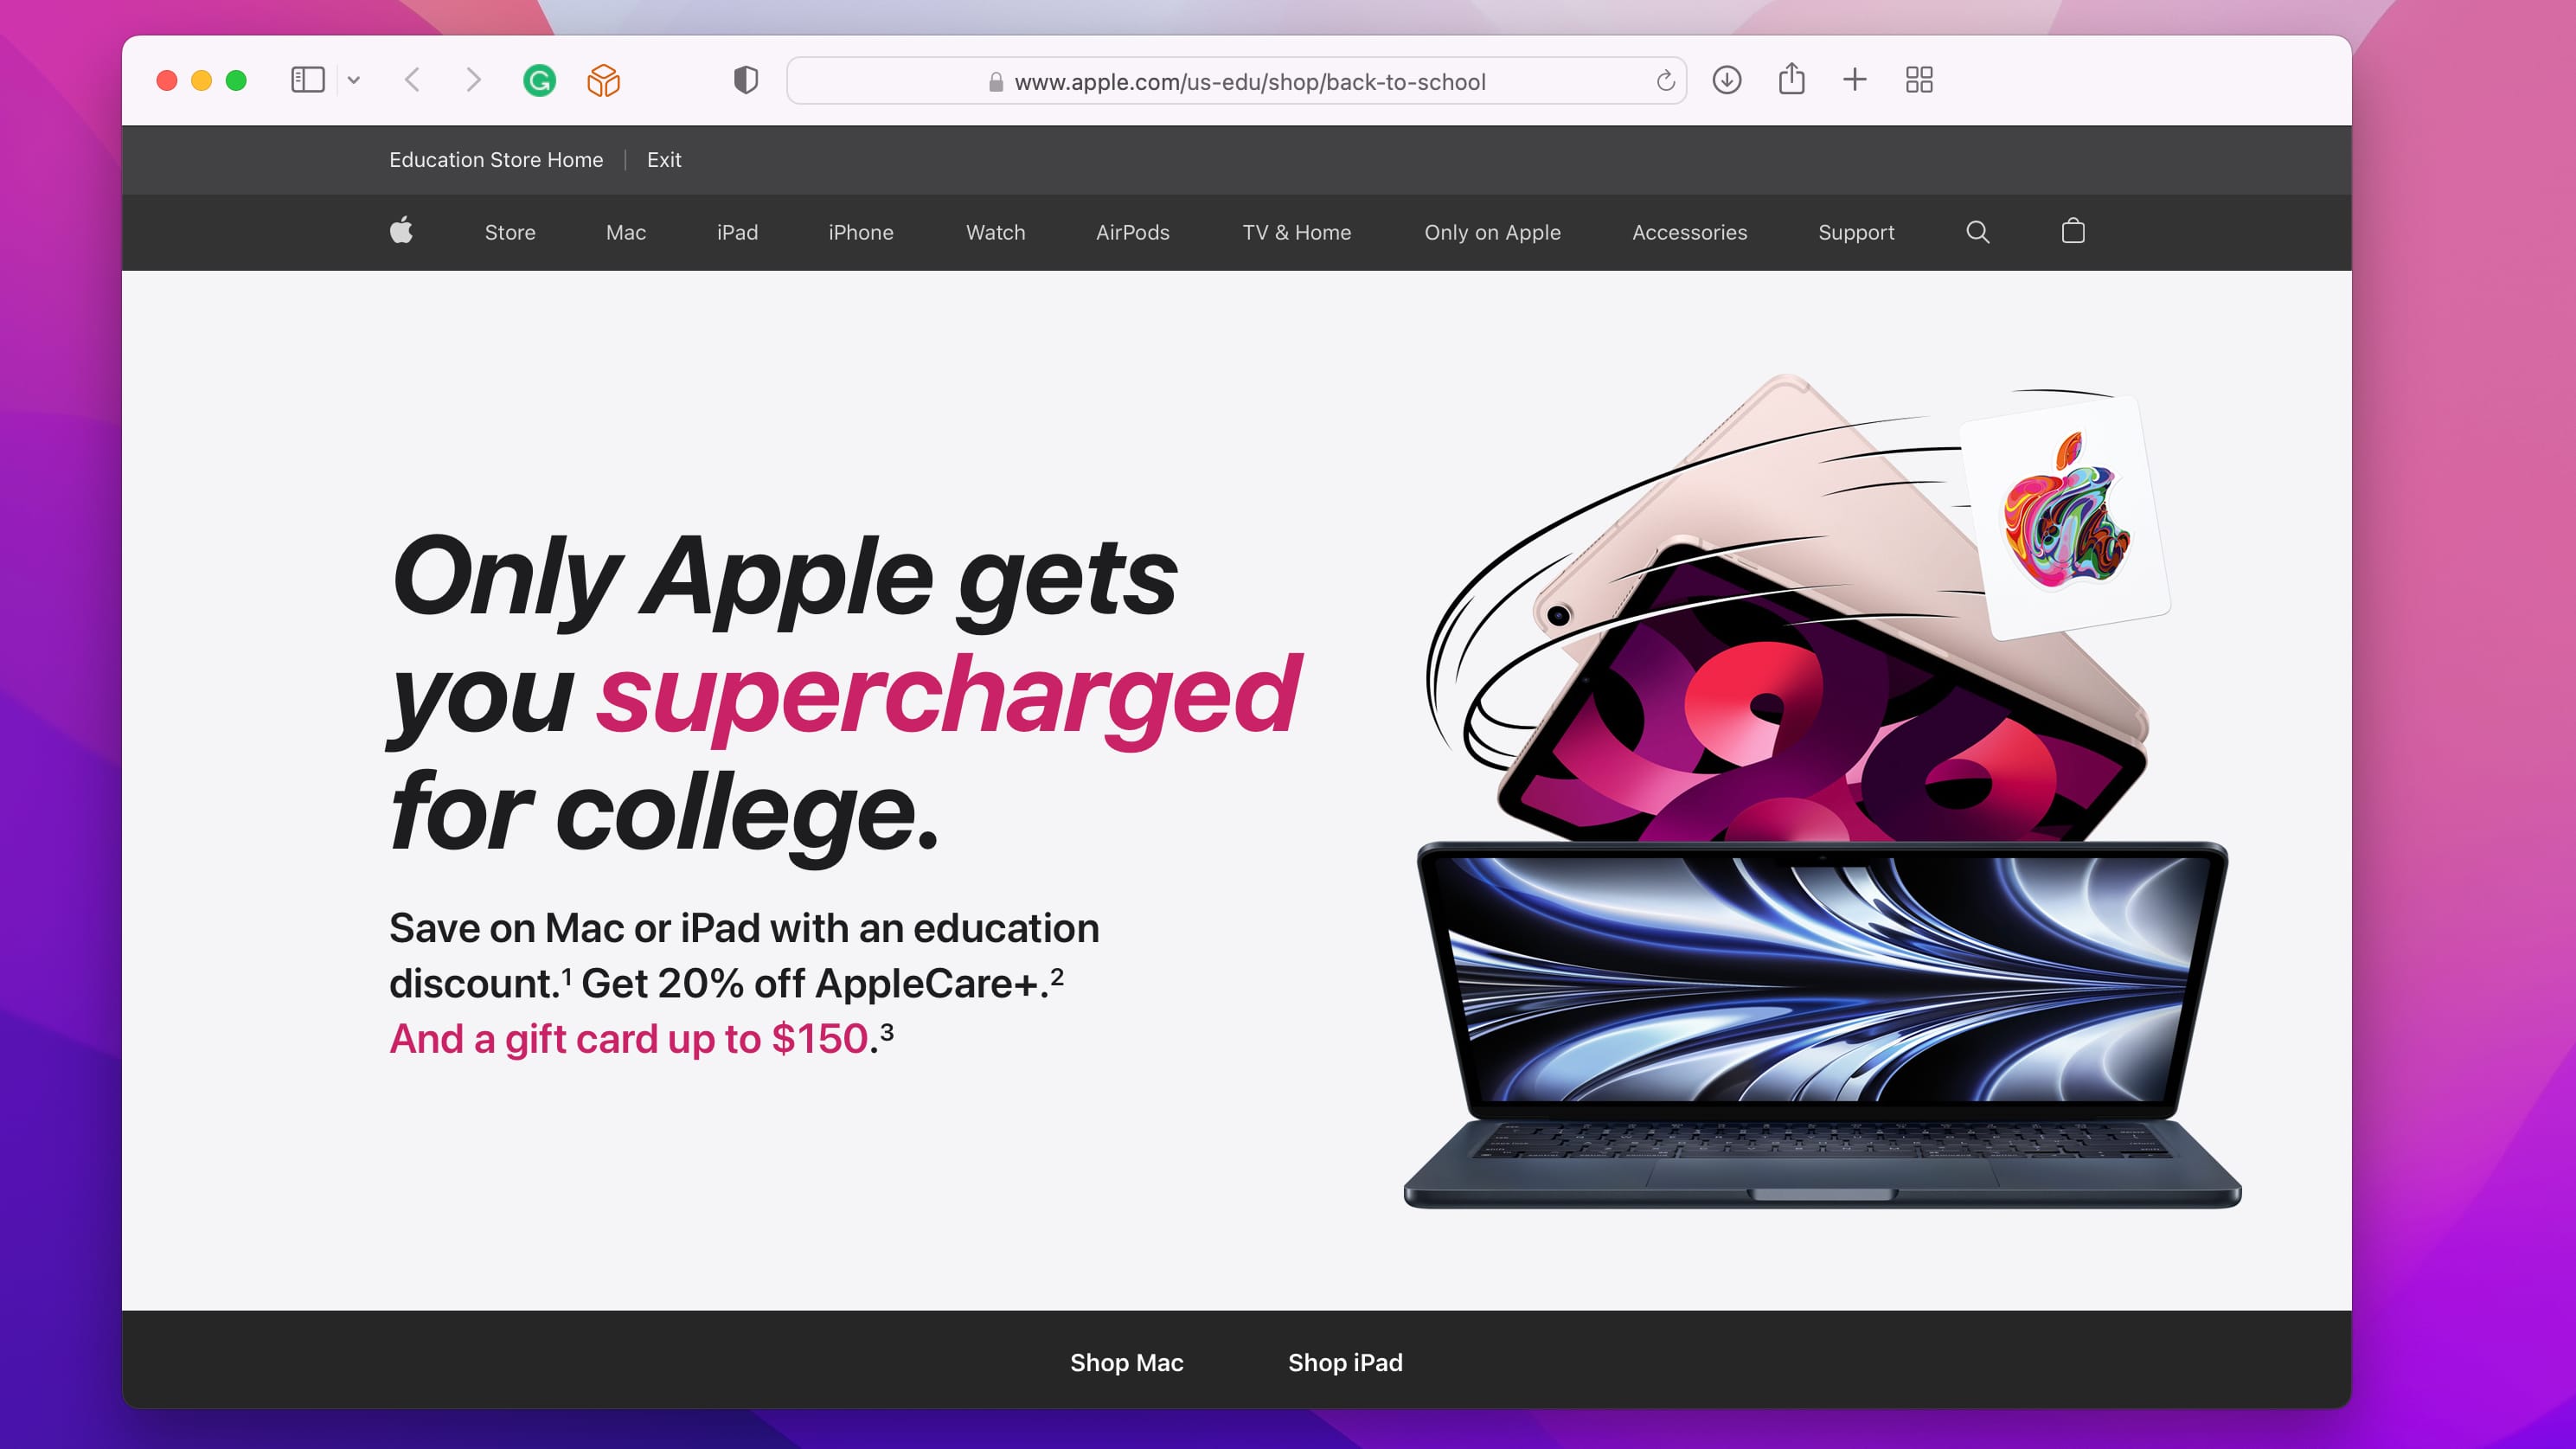 A Safari screenshot of a landing page on Apple's online educational store announcing the 2022 Back to School promotion which offers a free gift card with the purchase of an eligible Mac or iPad model